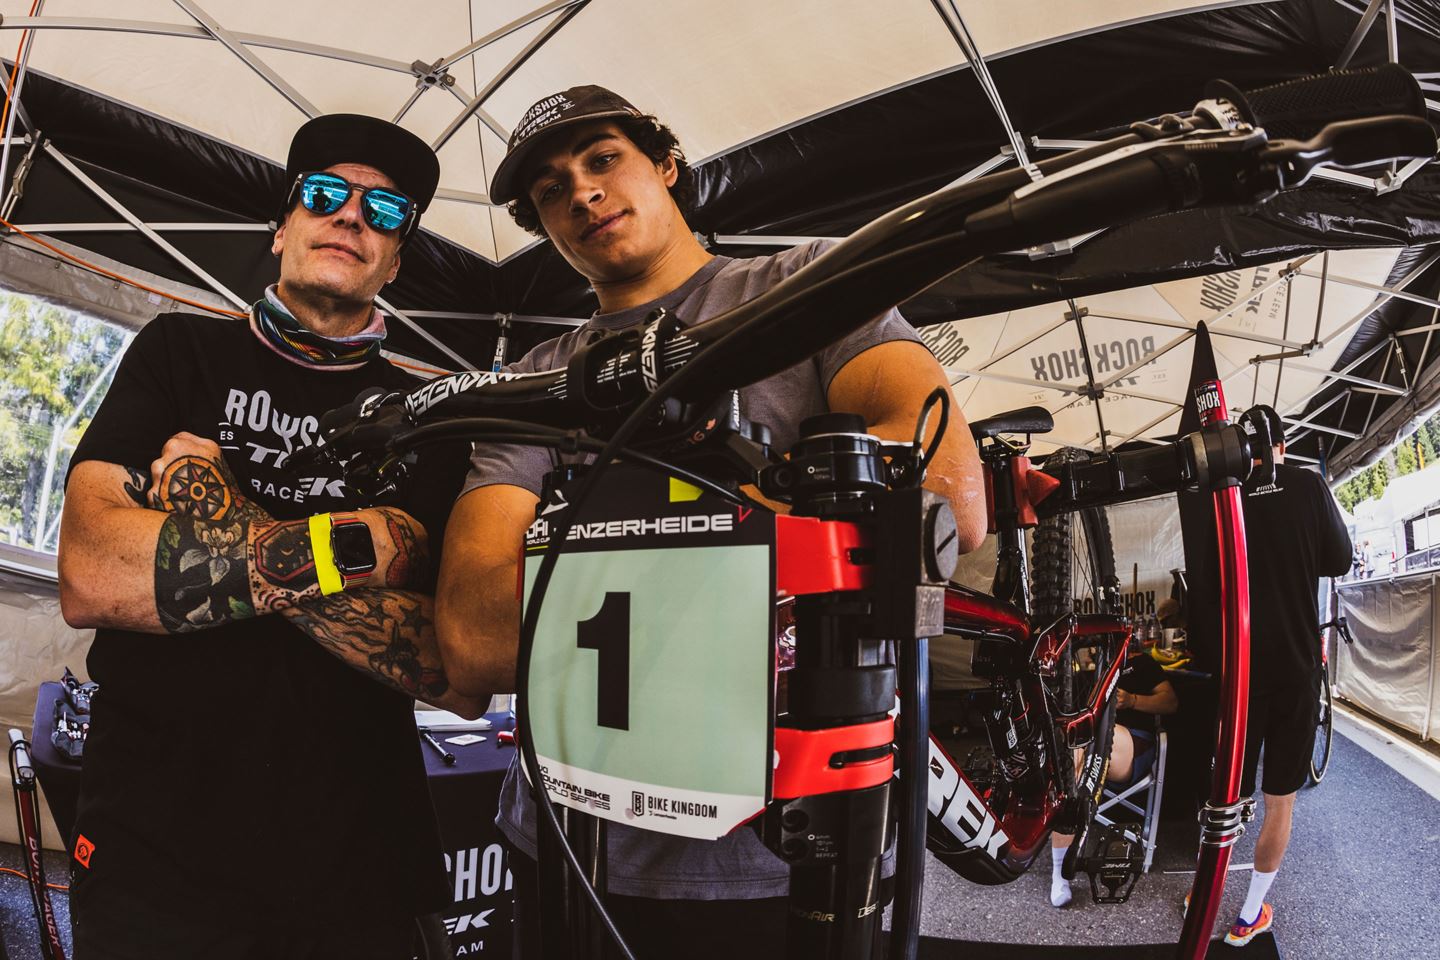 JT Evans and Tegan Cruz standing with the No. 1 race plate in the RockShox Trek Race Team pit.